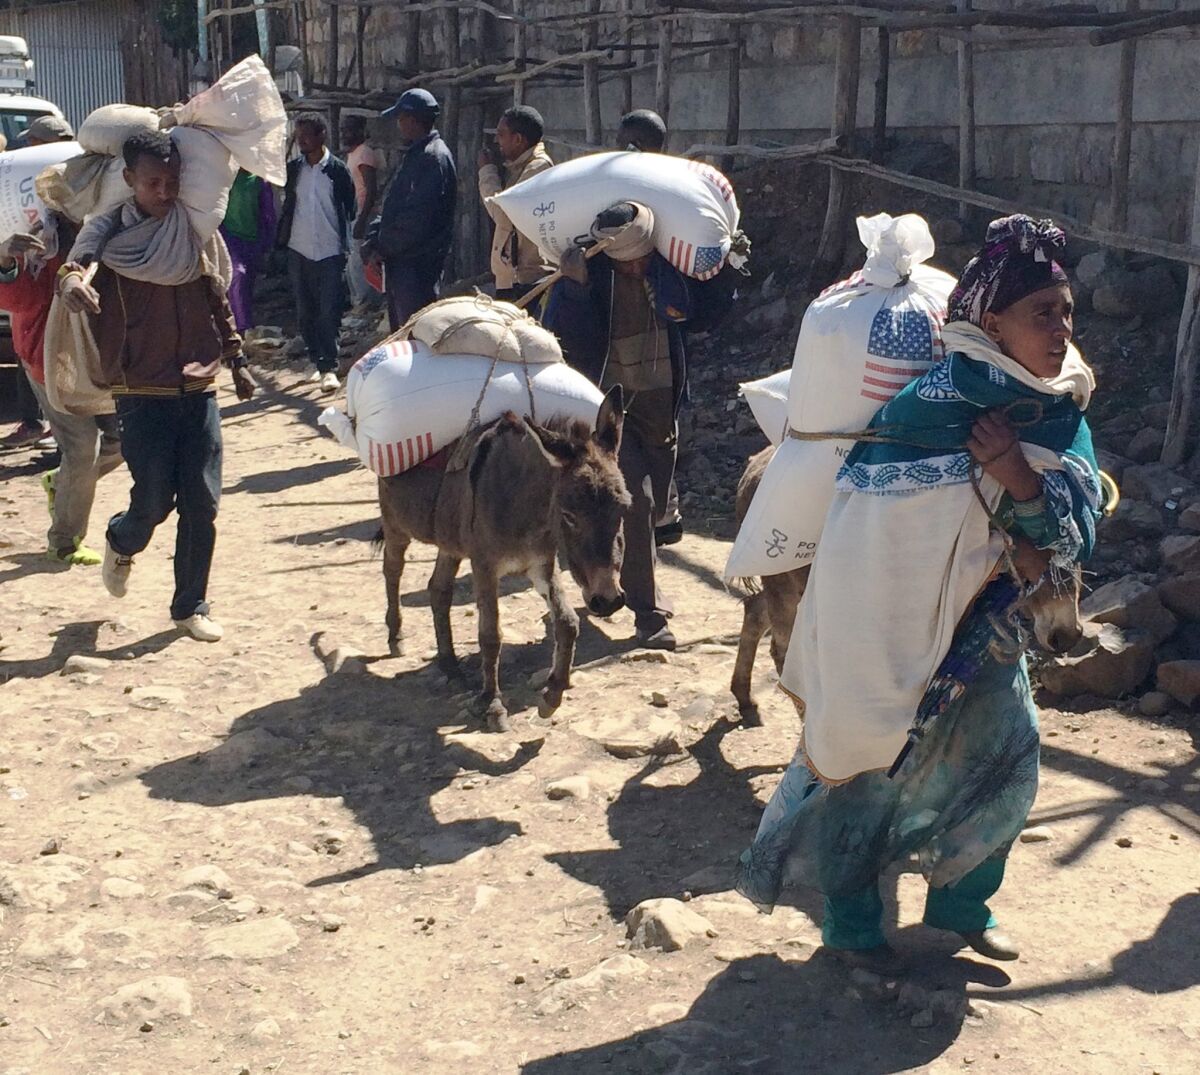 Families begin their journey home with U.S. food aid from a distribution site in Denkena Kebele, Ethiopia, on Dec. 14, 2015.